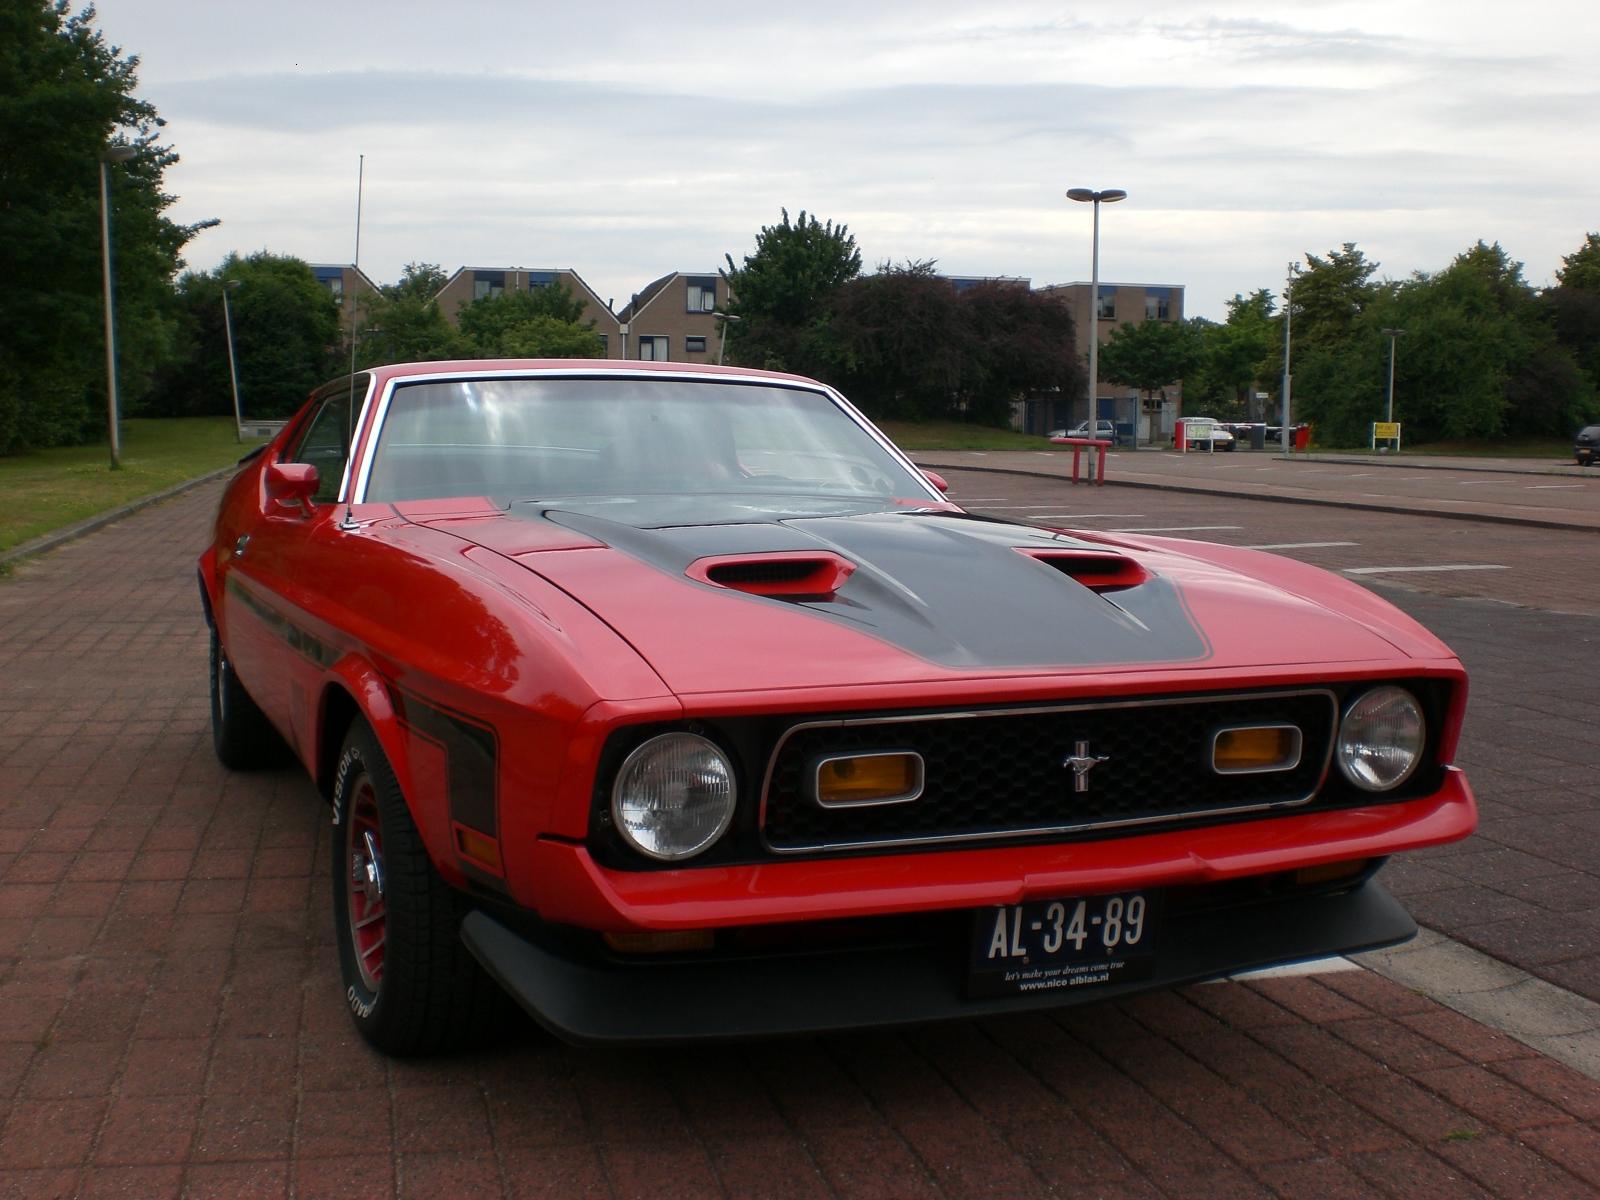 Curbside Classic: 1973 Mustang - No Apologies Necessary - Curbside Classic